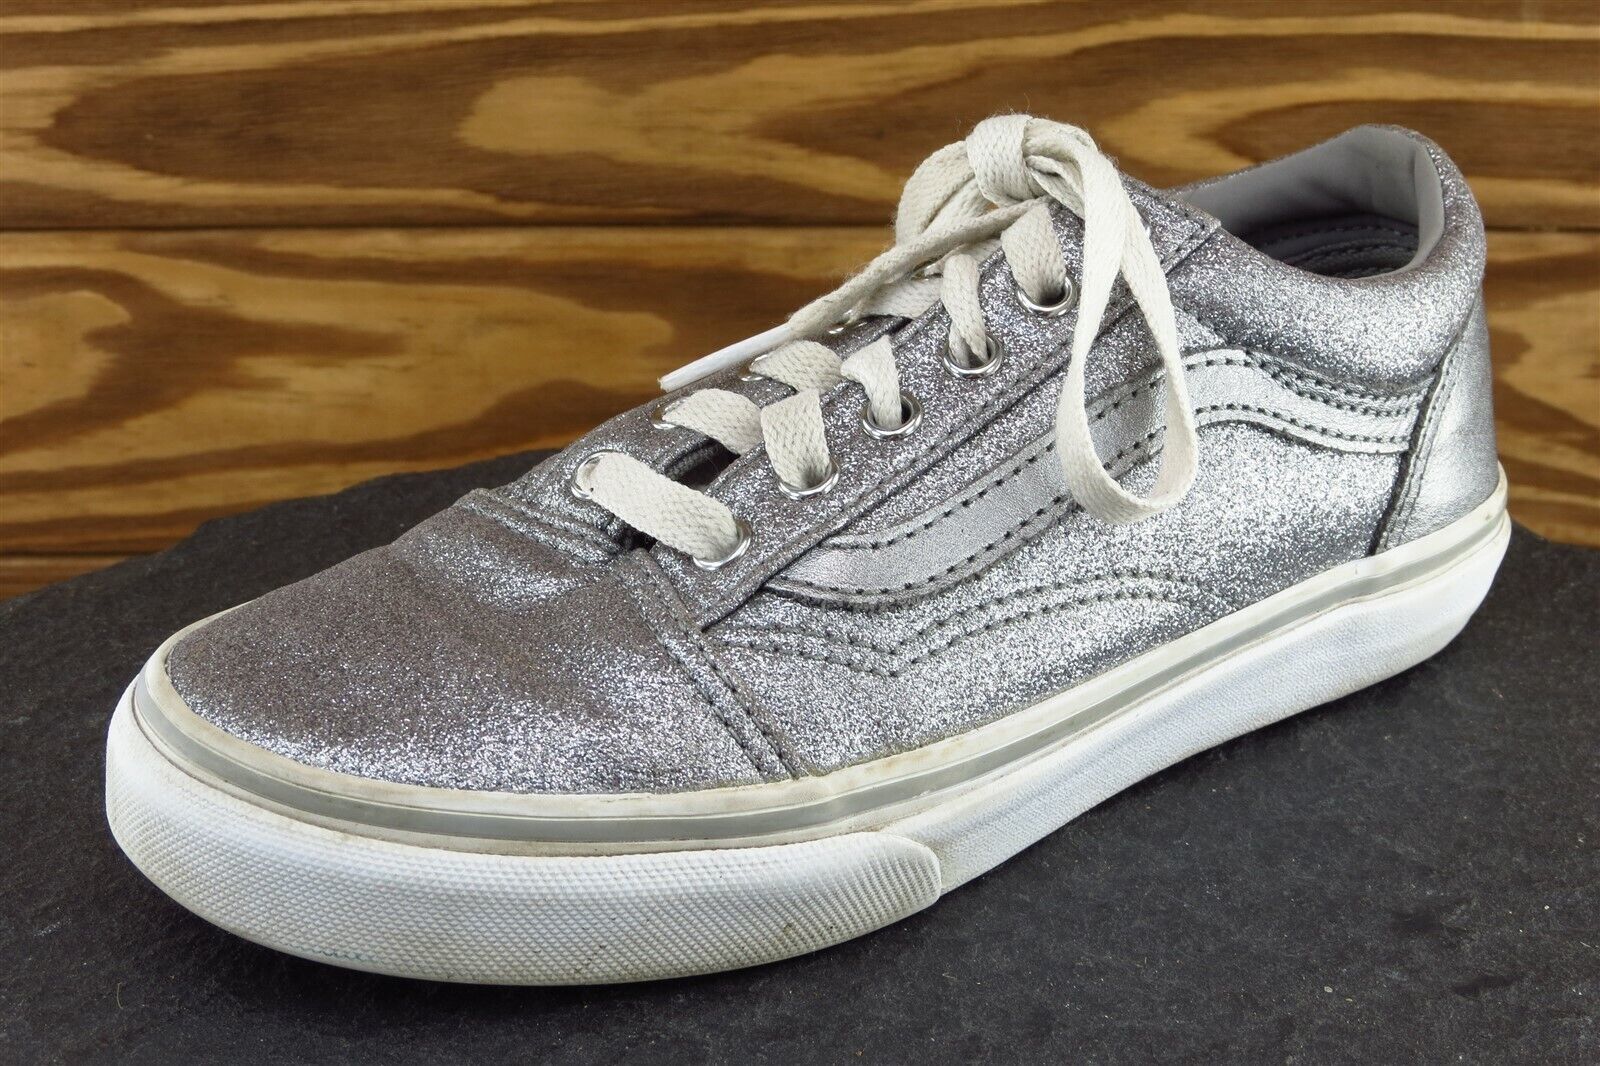 Primary image for VANS Youth Girls Shoes Size 3 M Silver Skateboarding Fabric